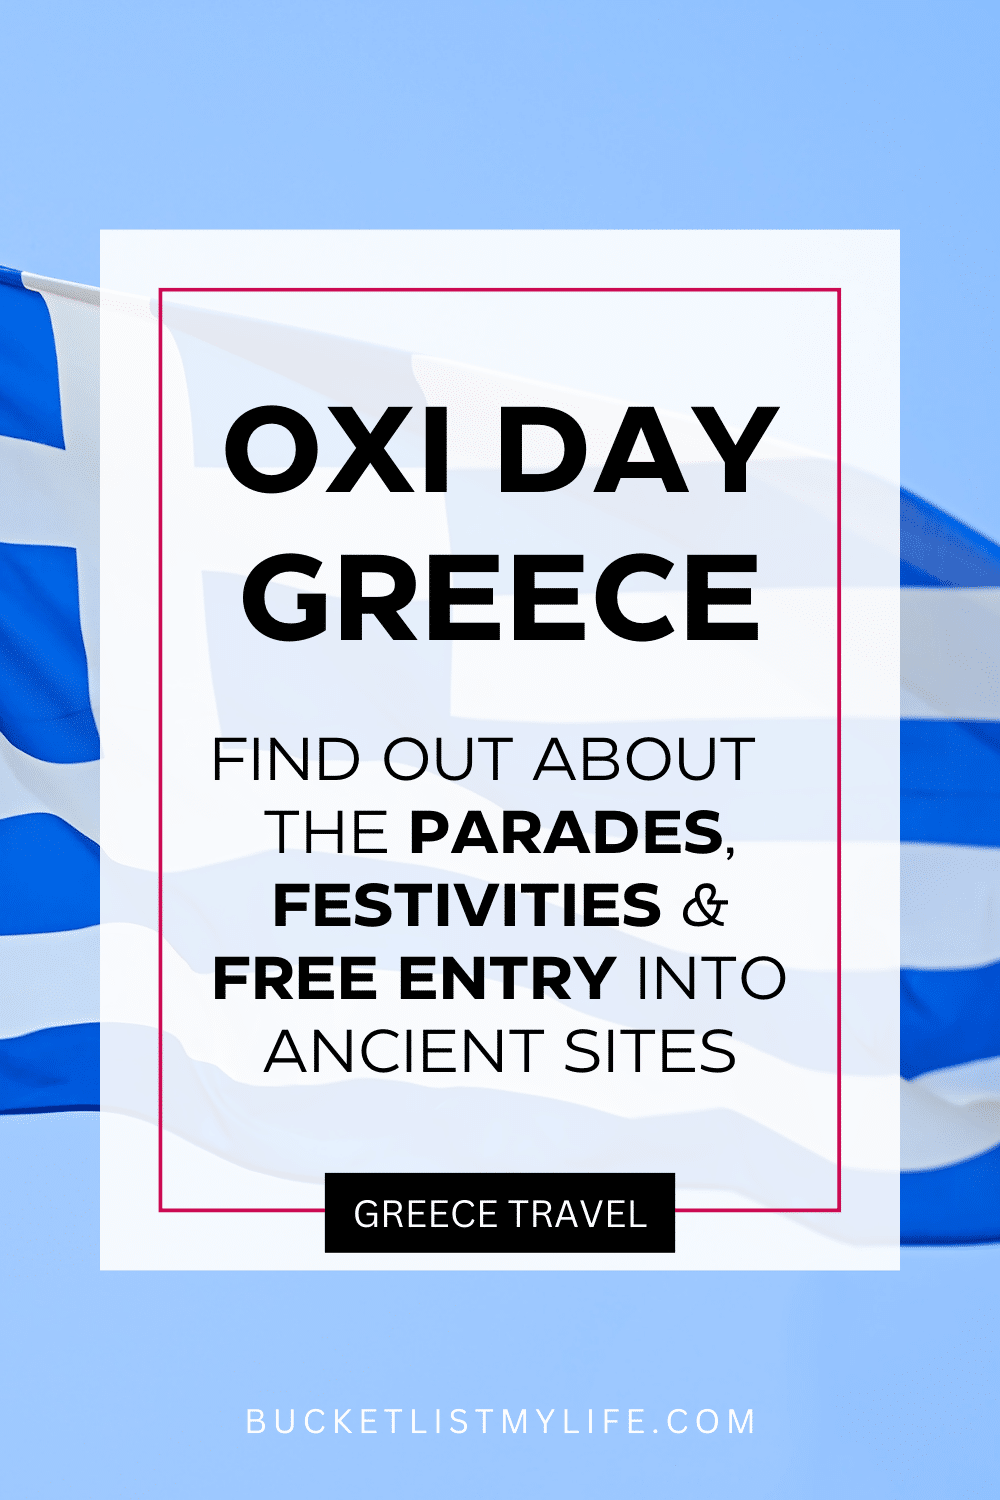 Oxi Day Greece: How And Why The Holiday Is Celebrated